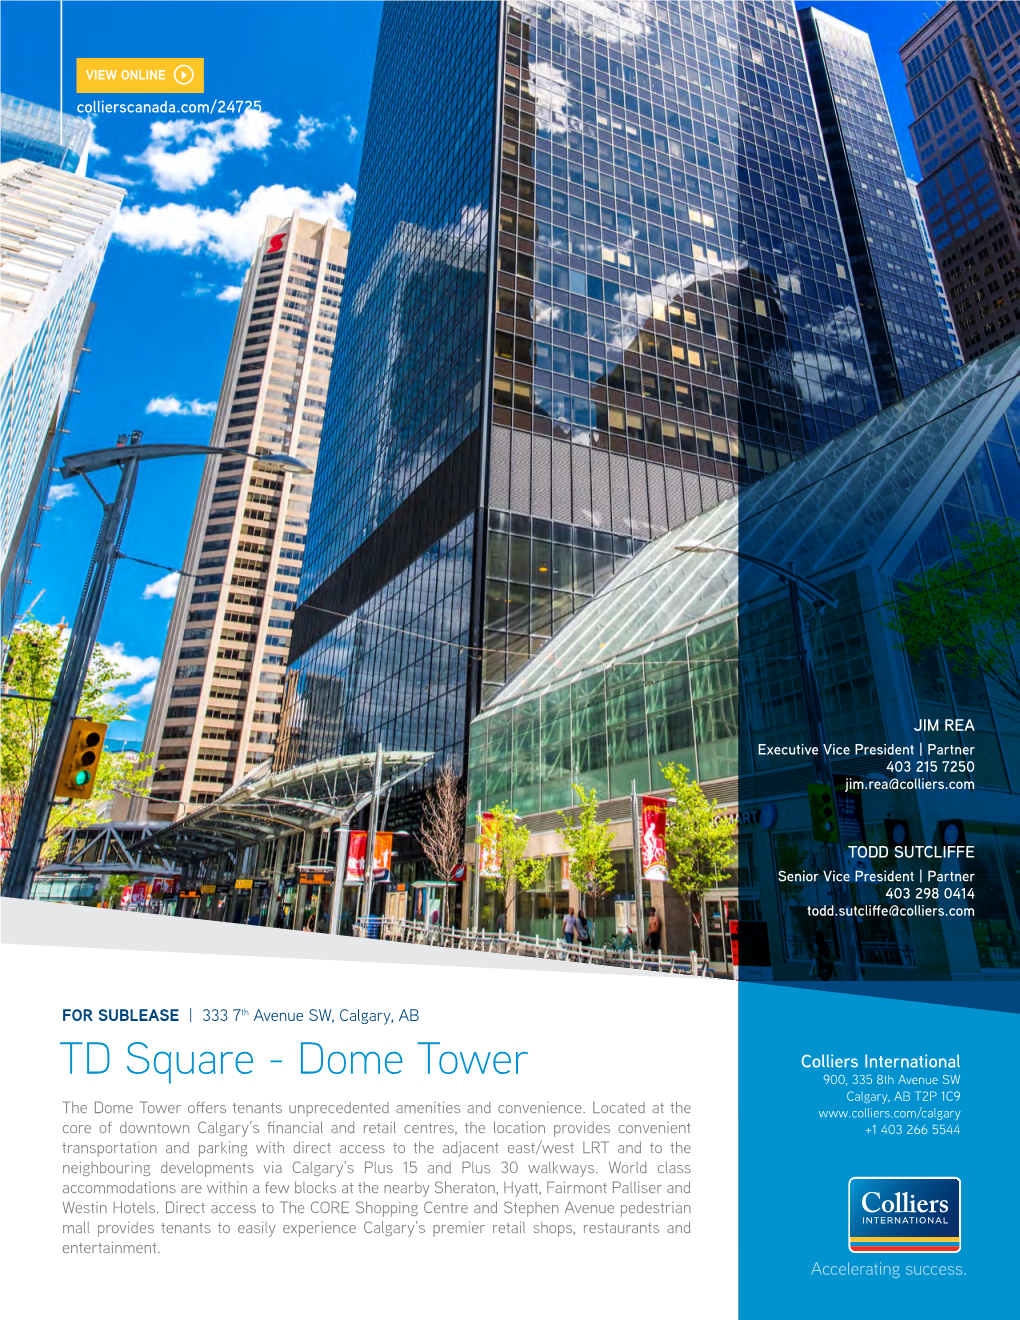 Dome Tower 900, 335 8Th Avenue SW Calgary, AB T2P 1C9 the Dome Tower Offers Tenants Unprecedented Amenities and Convenience